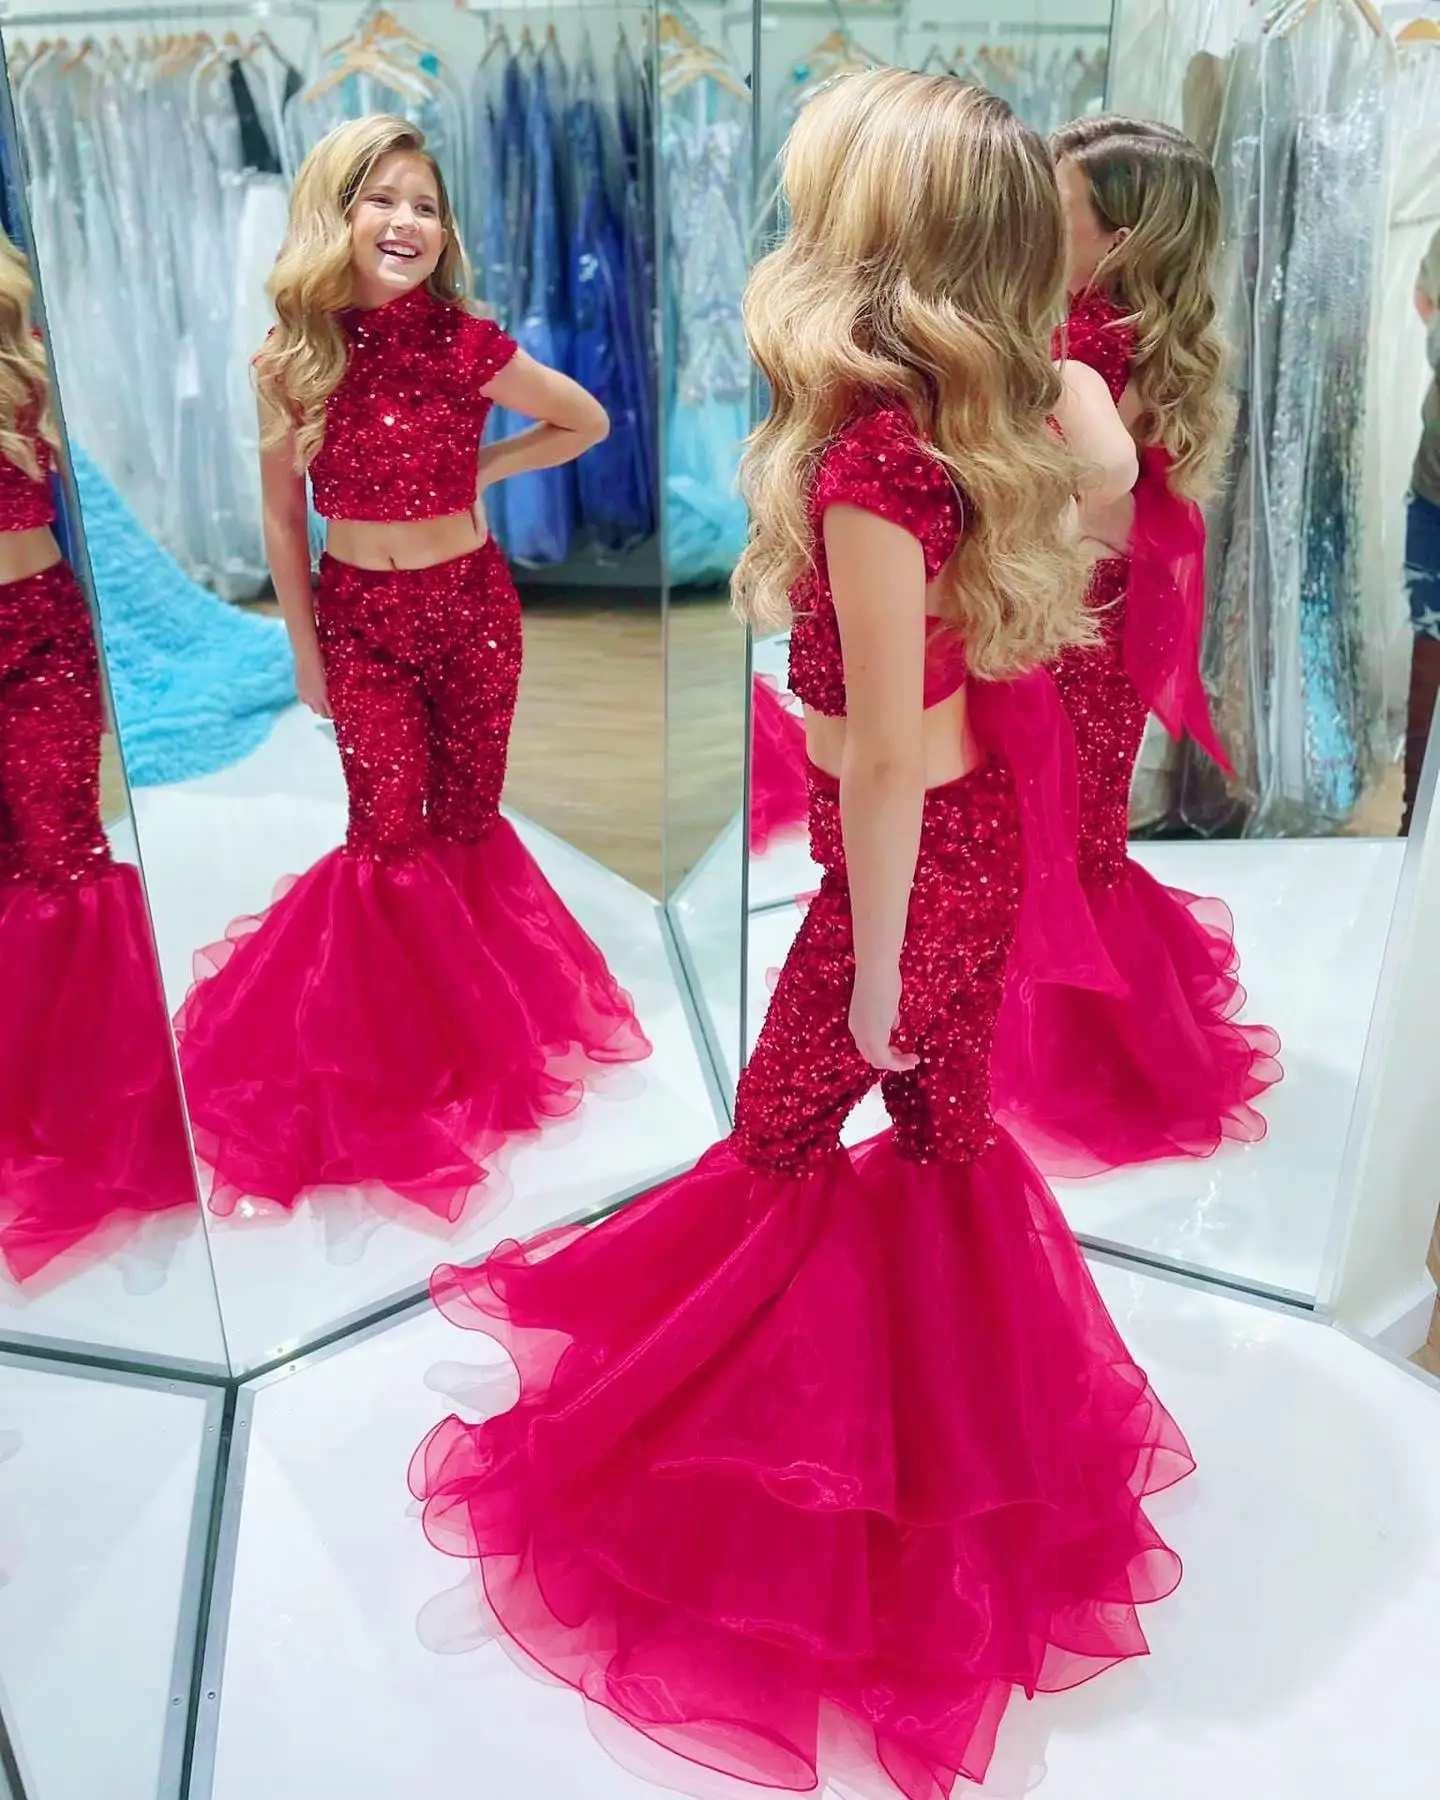 

Sparkling Sequined Flower Girl Dresses High Collar Short Sleeves Pageant Party Princess Gowns Two Pieces Mermaid Pant Suits